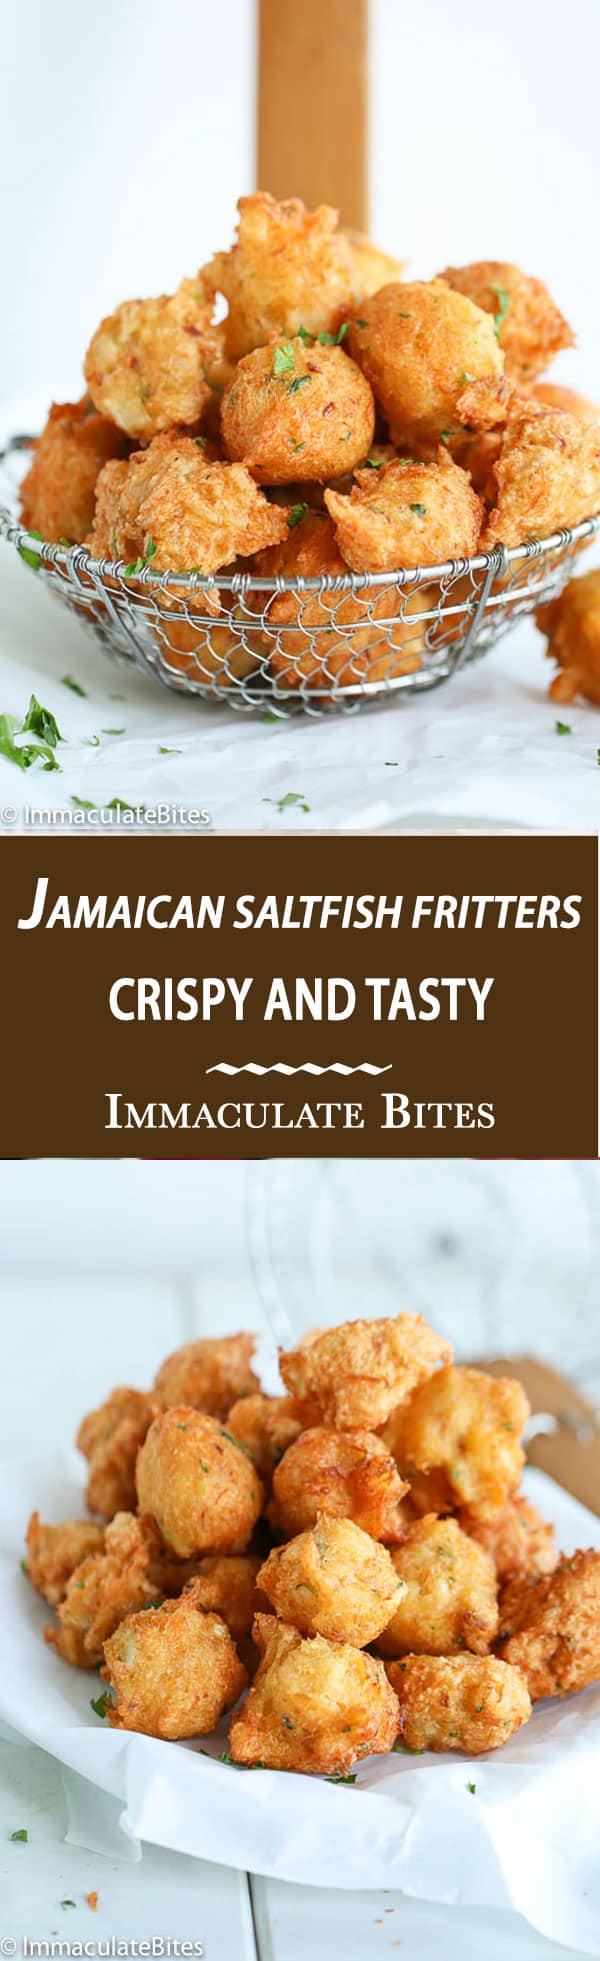 Spiced Jamaican Saltfish fritters – Crispy on the outside and soft on the inside a tastebud sensation!